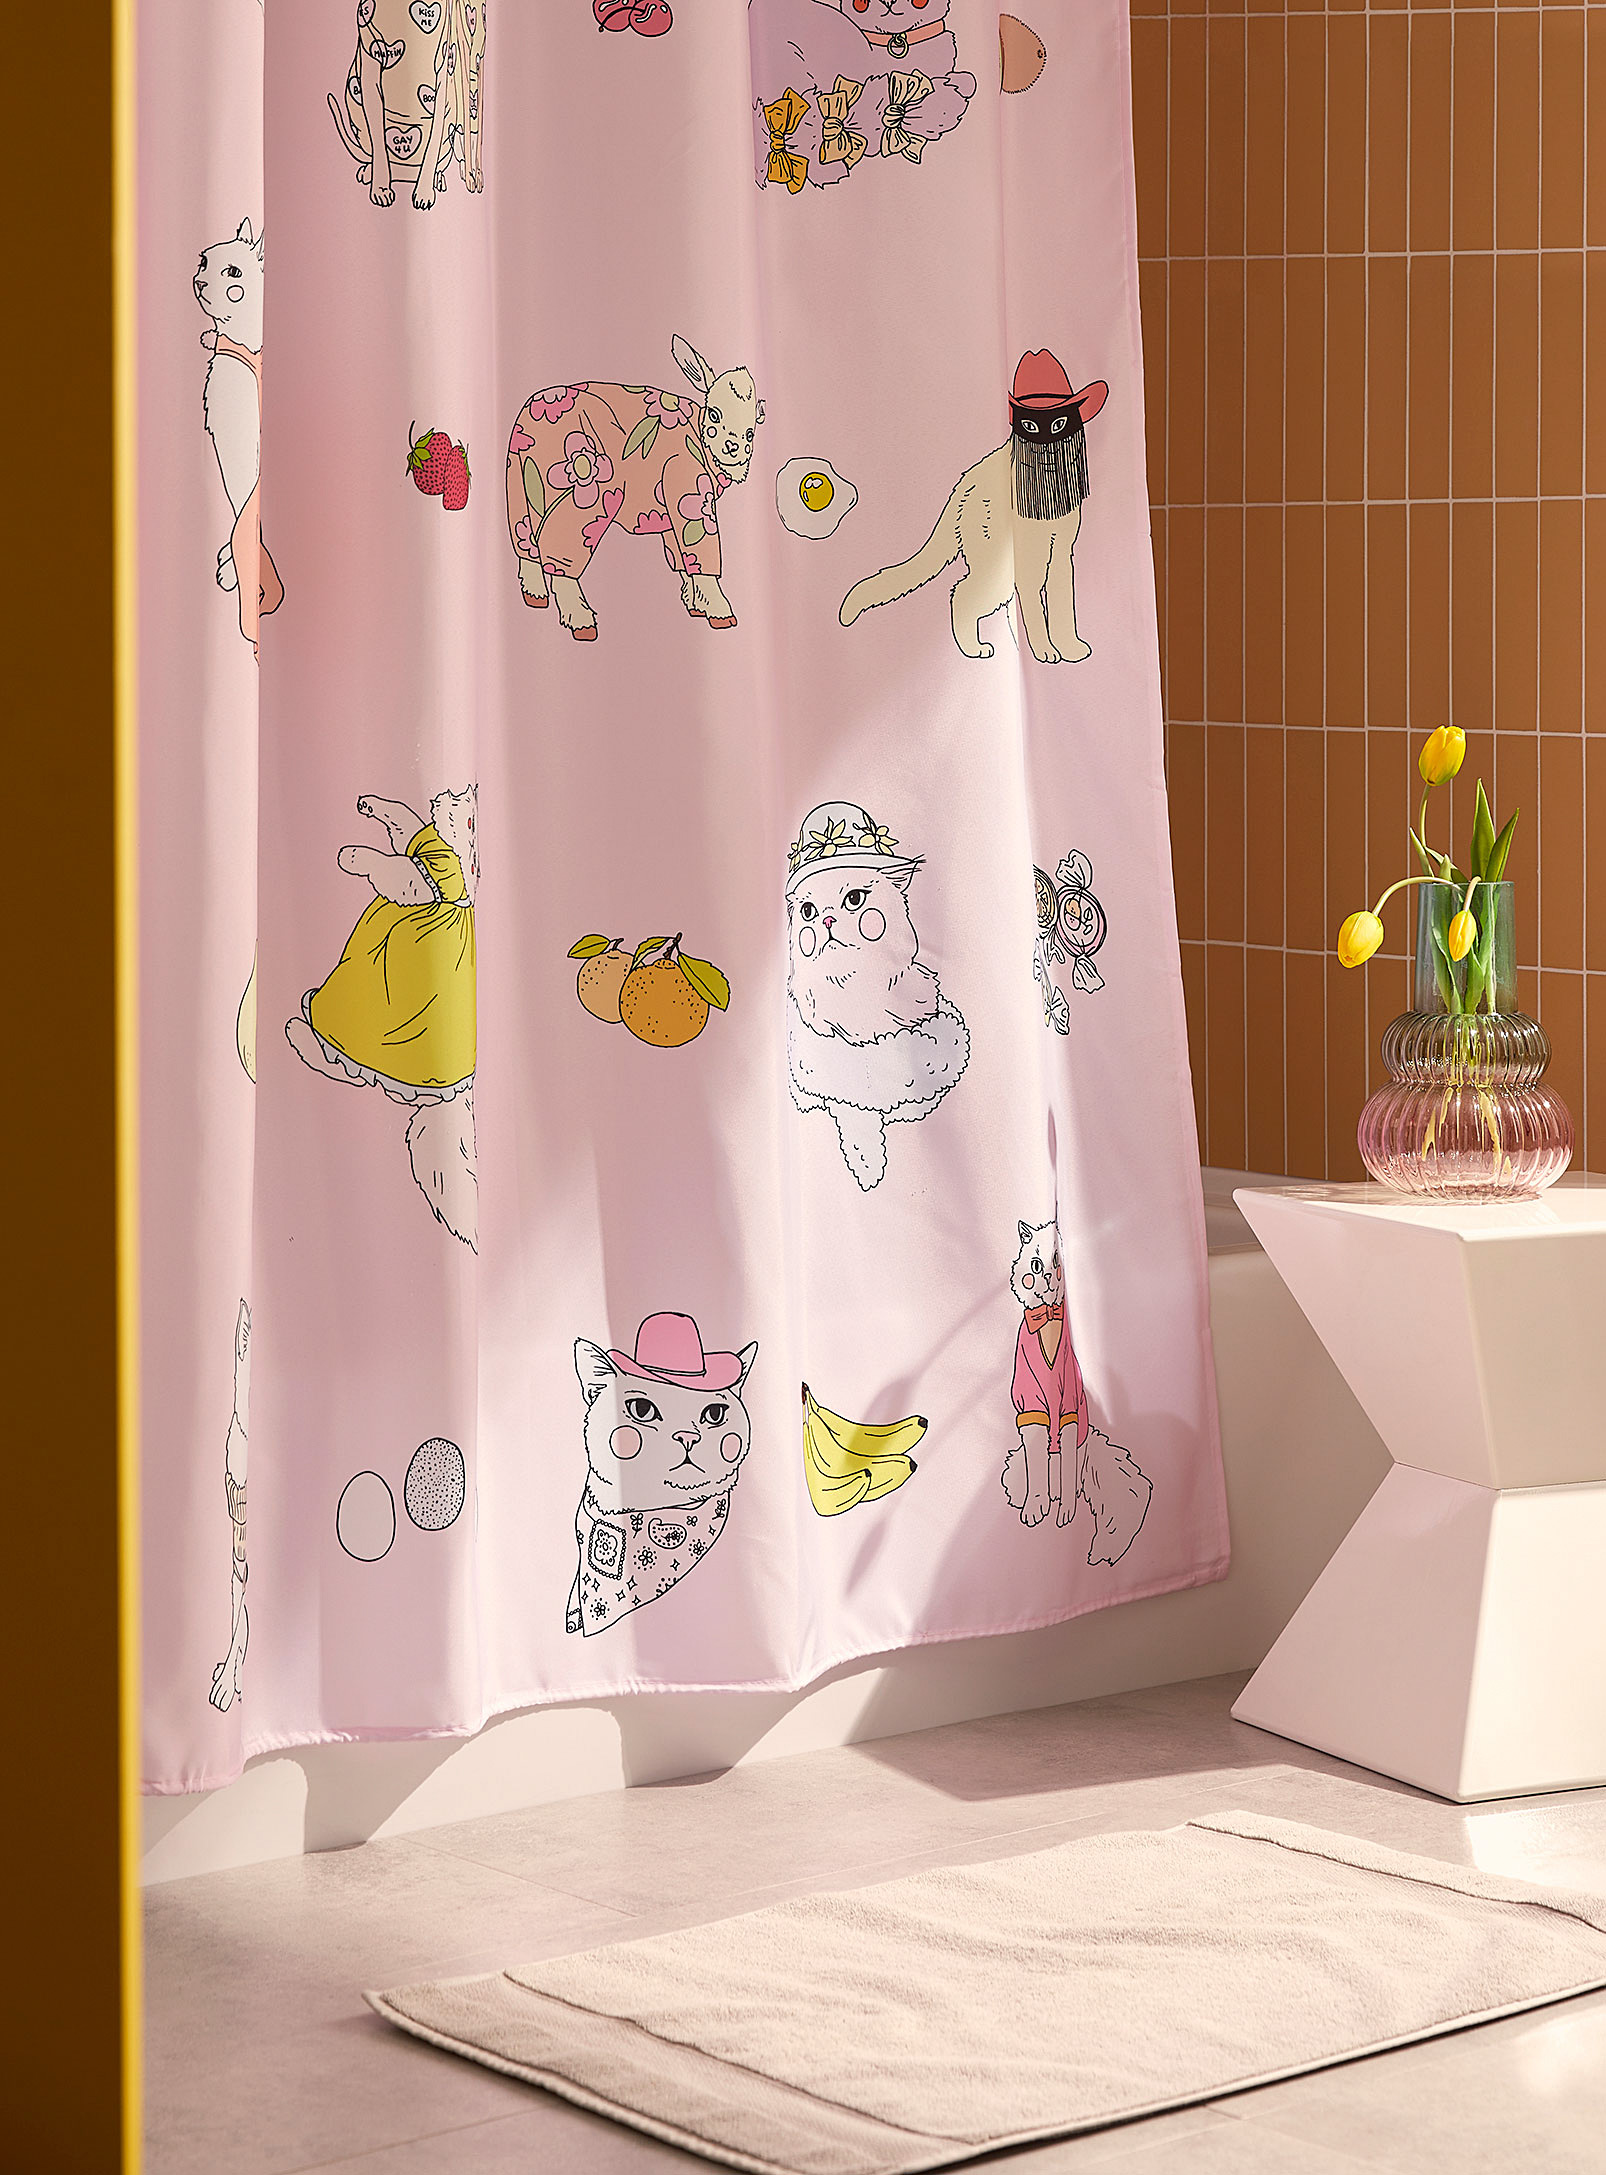 Costume de bain - Cats in clothes shower curtain In collaboration with artist Lovestruck Prints